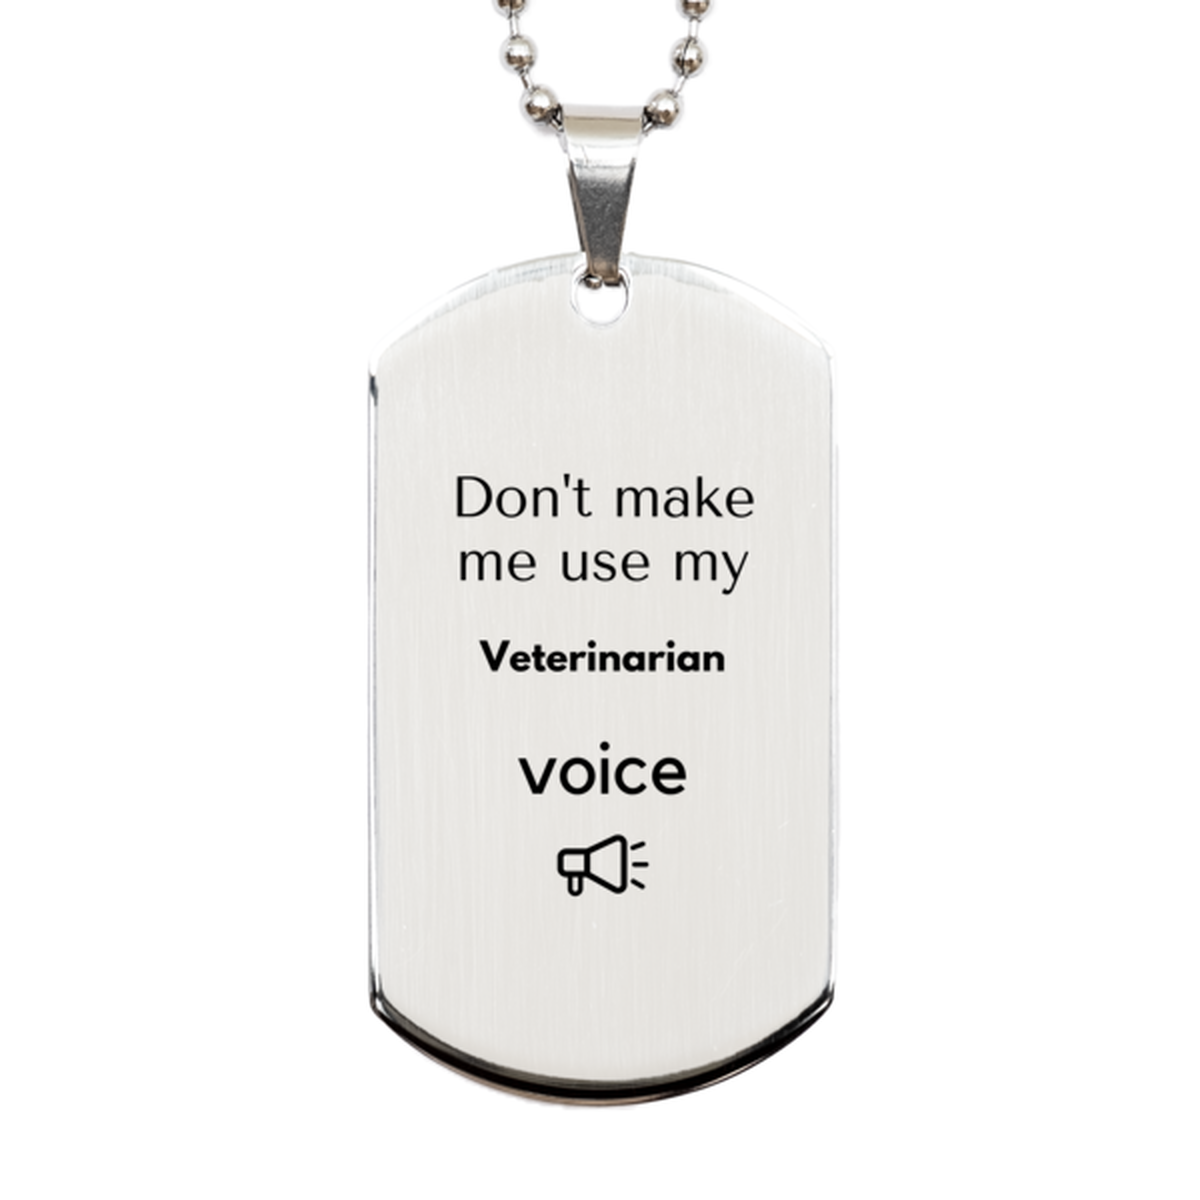 Don't make me use my Veterinarian voice, Sarcasm Veterinarian Gifts, Christmas Veterinarian Silver Dog Tag Birthday Unique Gifts For Veterinarian Coworkers, Men, Women, Colleague, Friends